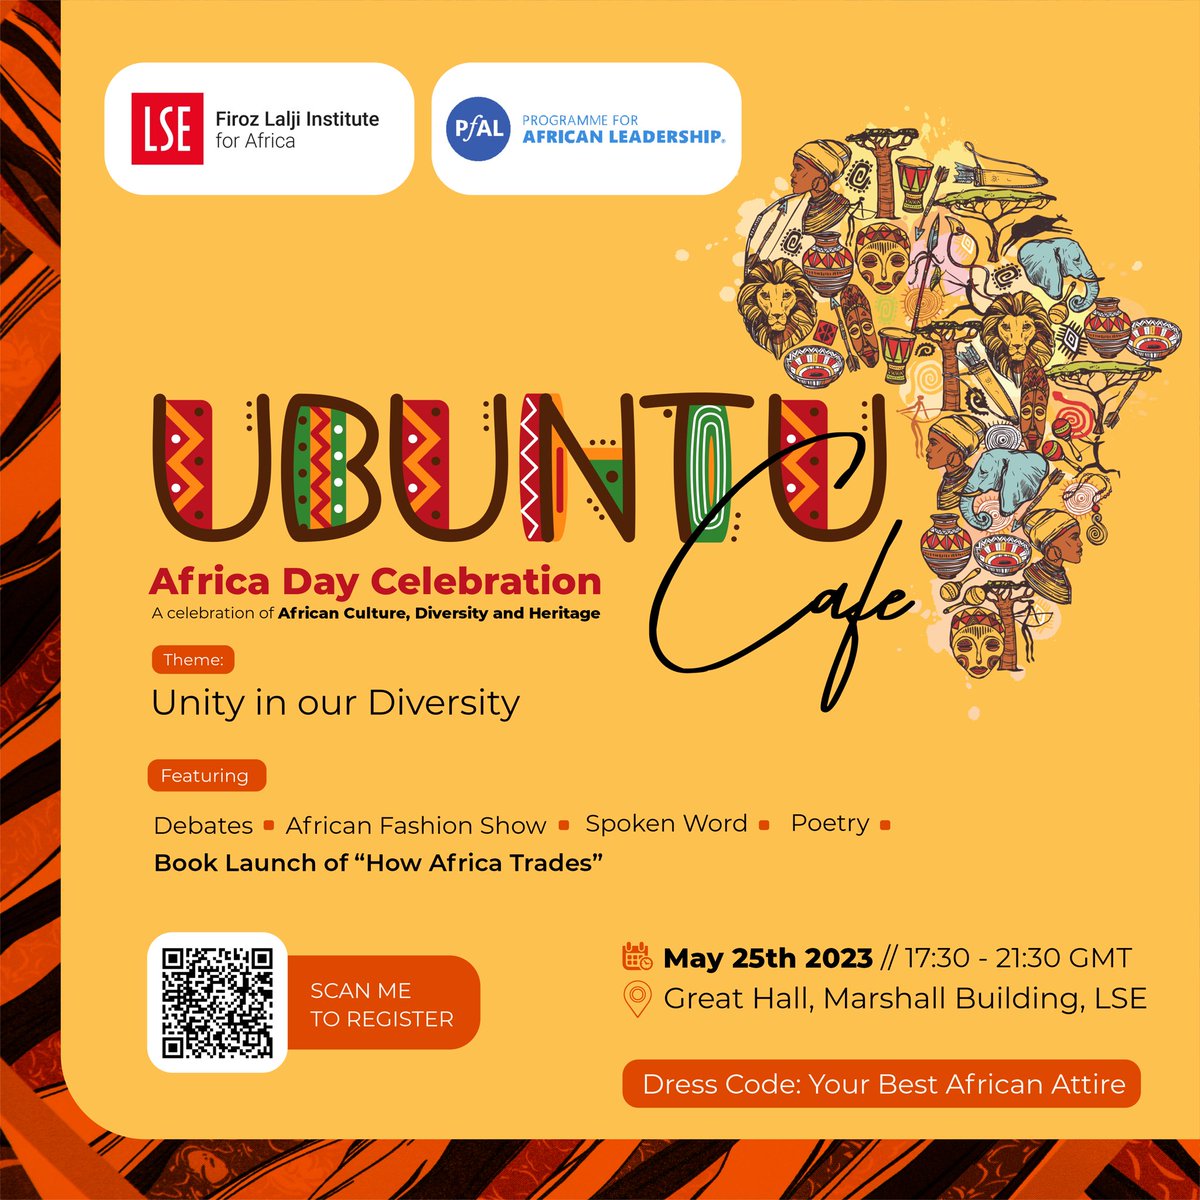 Don’t forget to register for the Ubuntu Café, a celebration of African culture, diversity and heritage. Join us this #AfricaDay for an evening of poetry, debates, a fashion show & the launch of Professor David Luke's ‘How Africa Trades’ More info: lse.ac.uk/africa/events/…